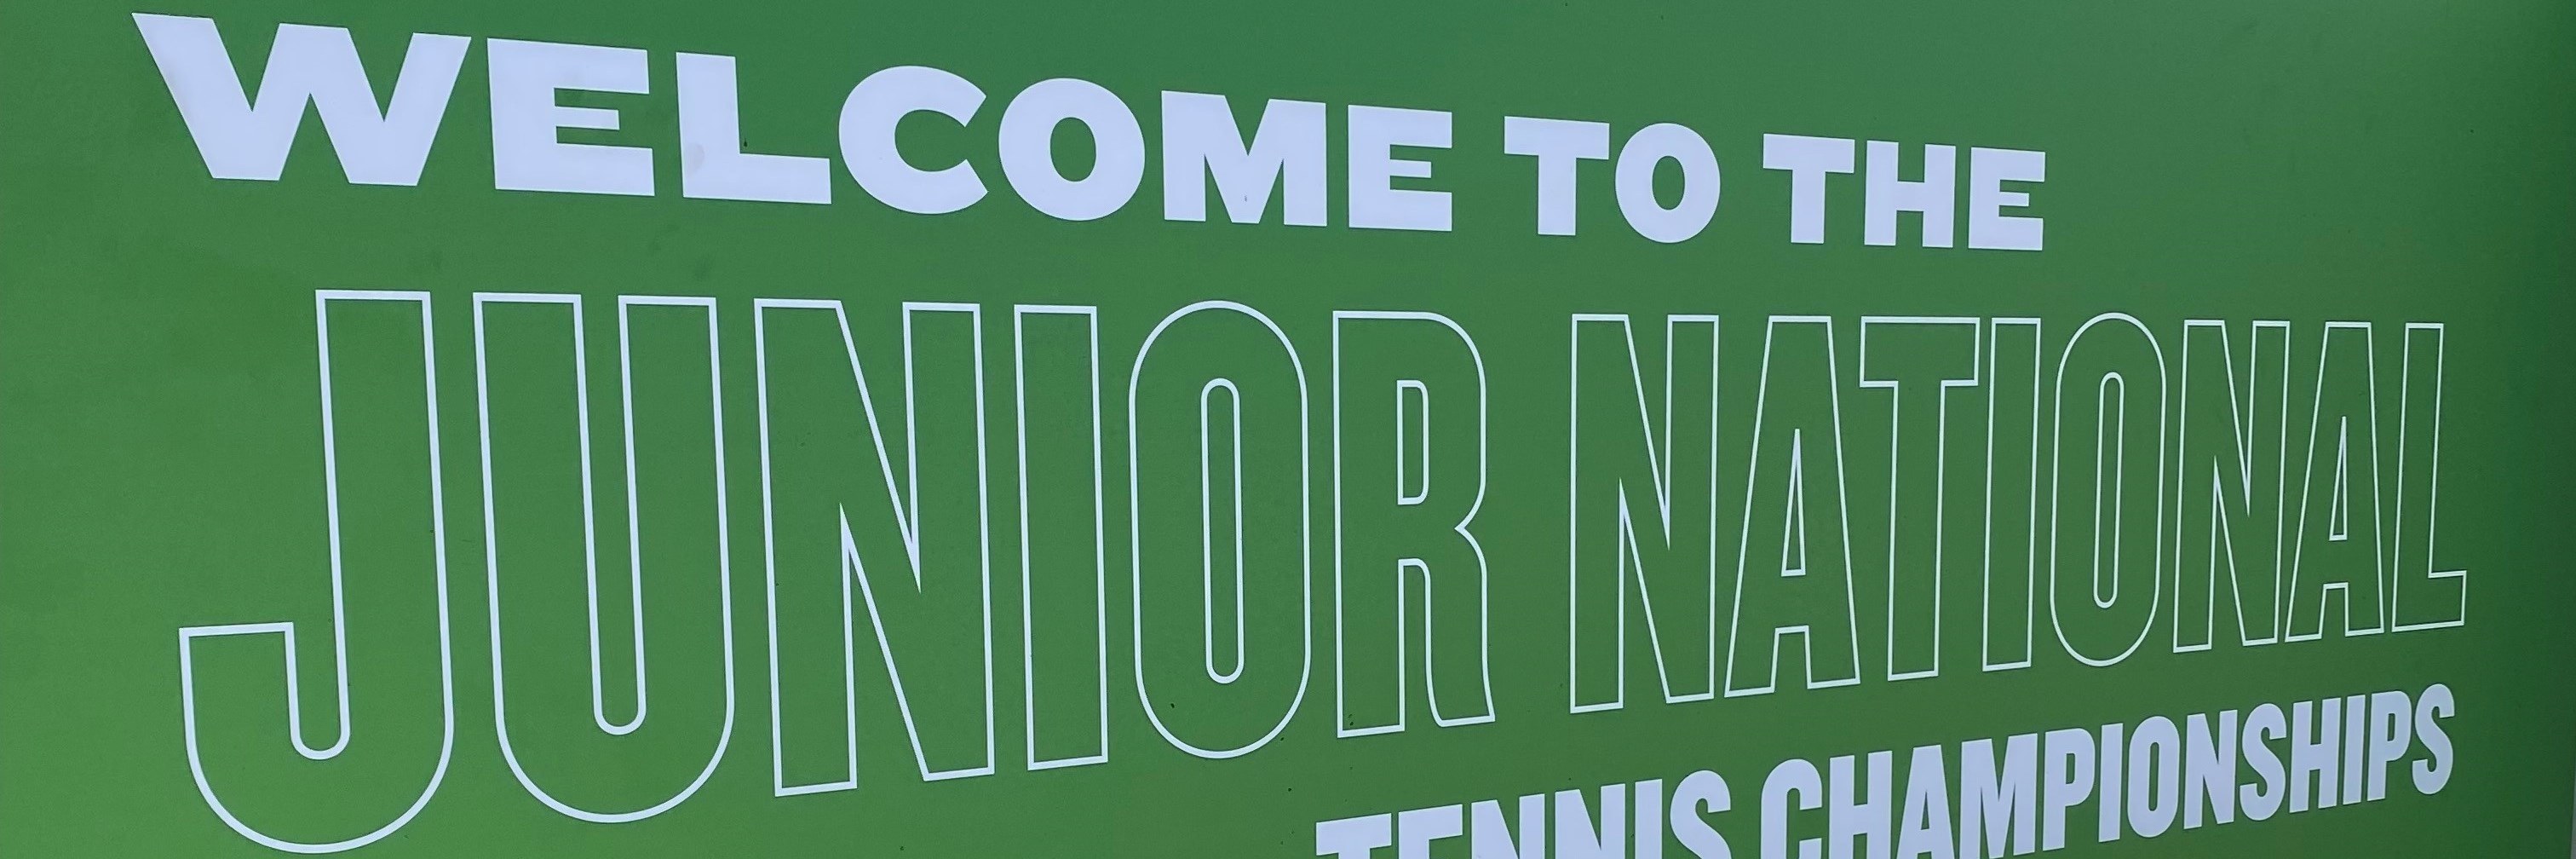 Junior National Championships welcome sign